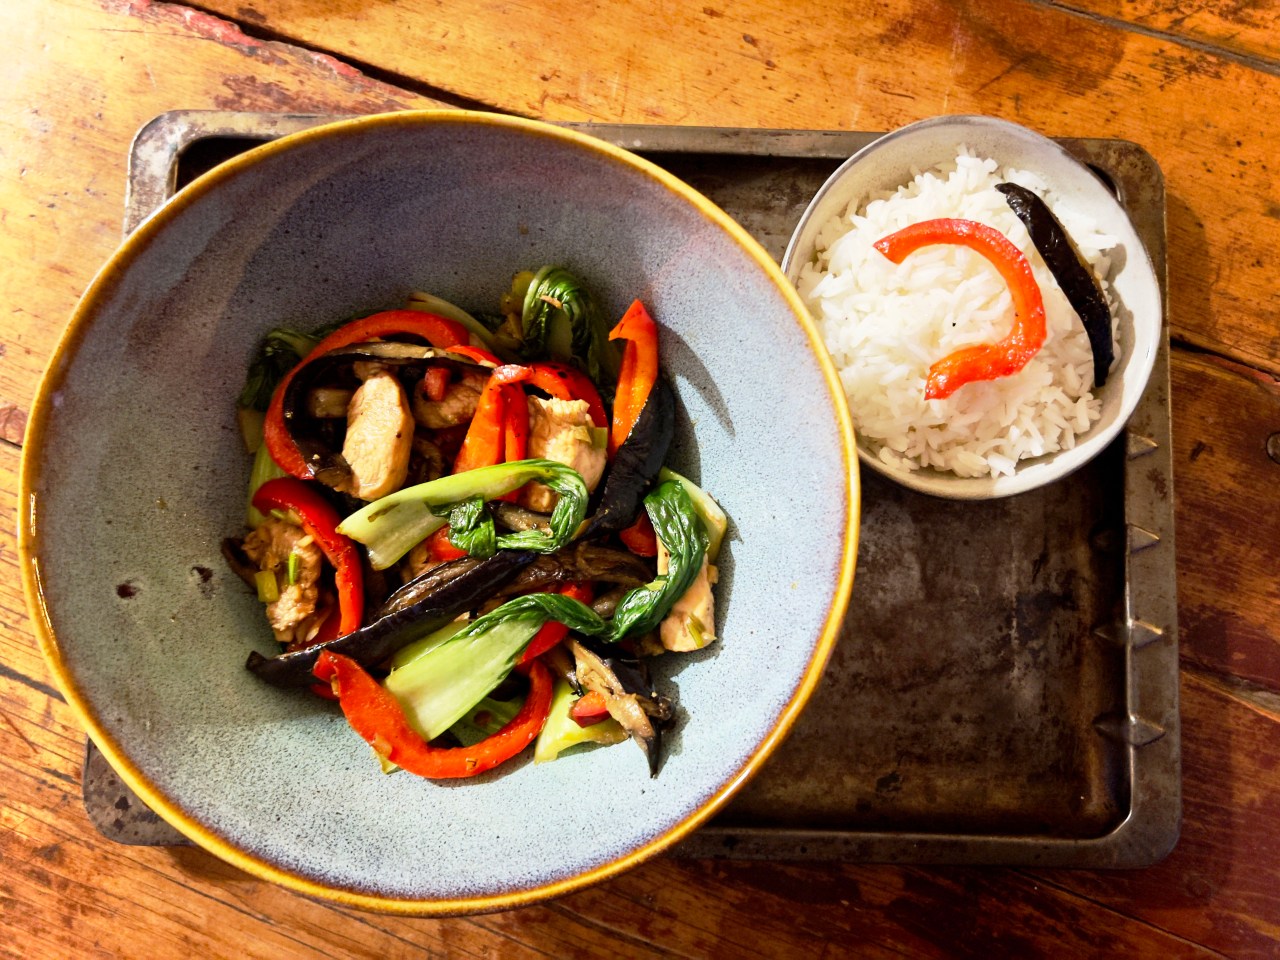 WOK FRY: What’s cooking today: Chicken stir fry with aubergine and pak choy